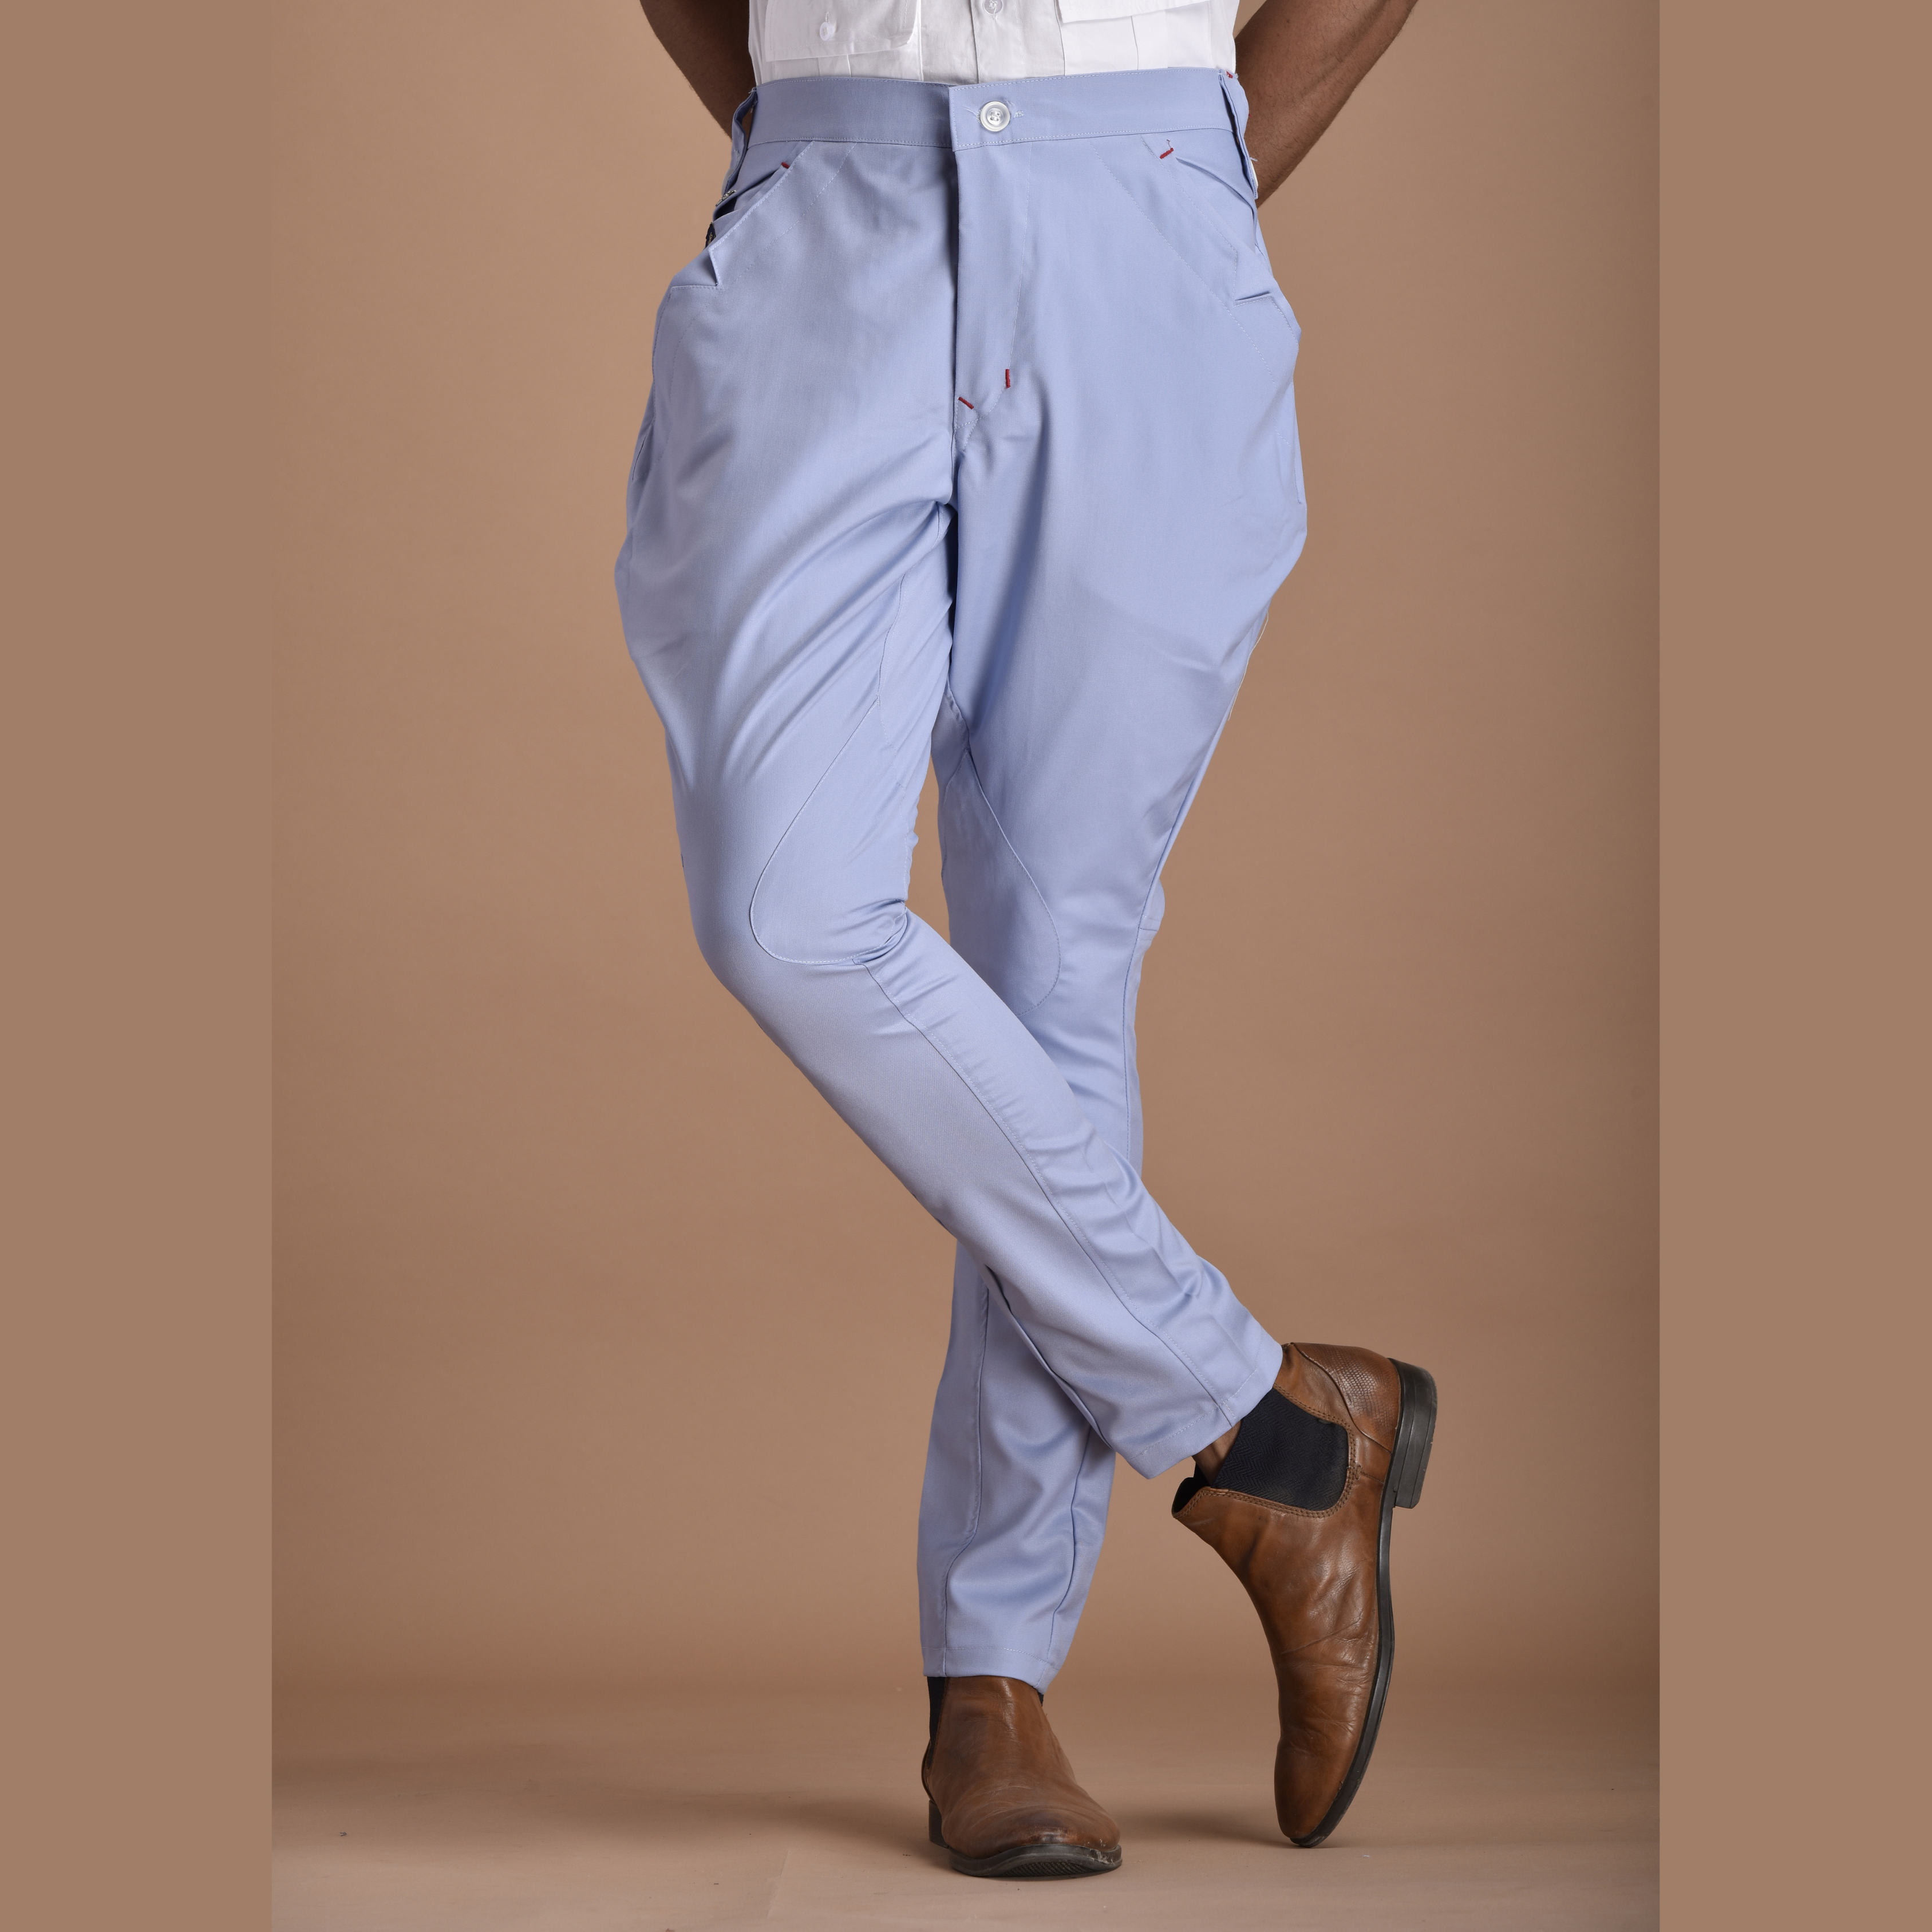 Italian Cut Breeches(Udaipur Pants)with contrasting knee patch|Polo pants|Jodhpur  Breeches - Breakthrough Clothing